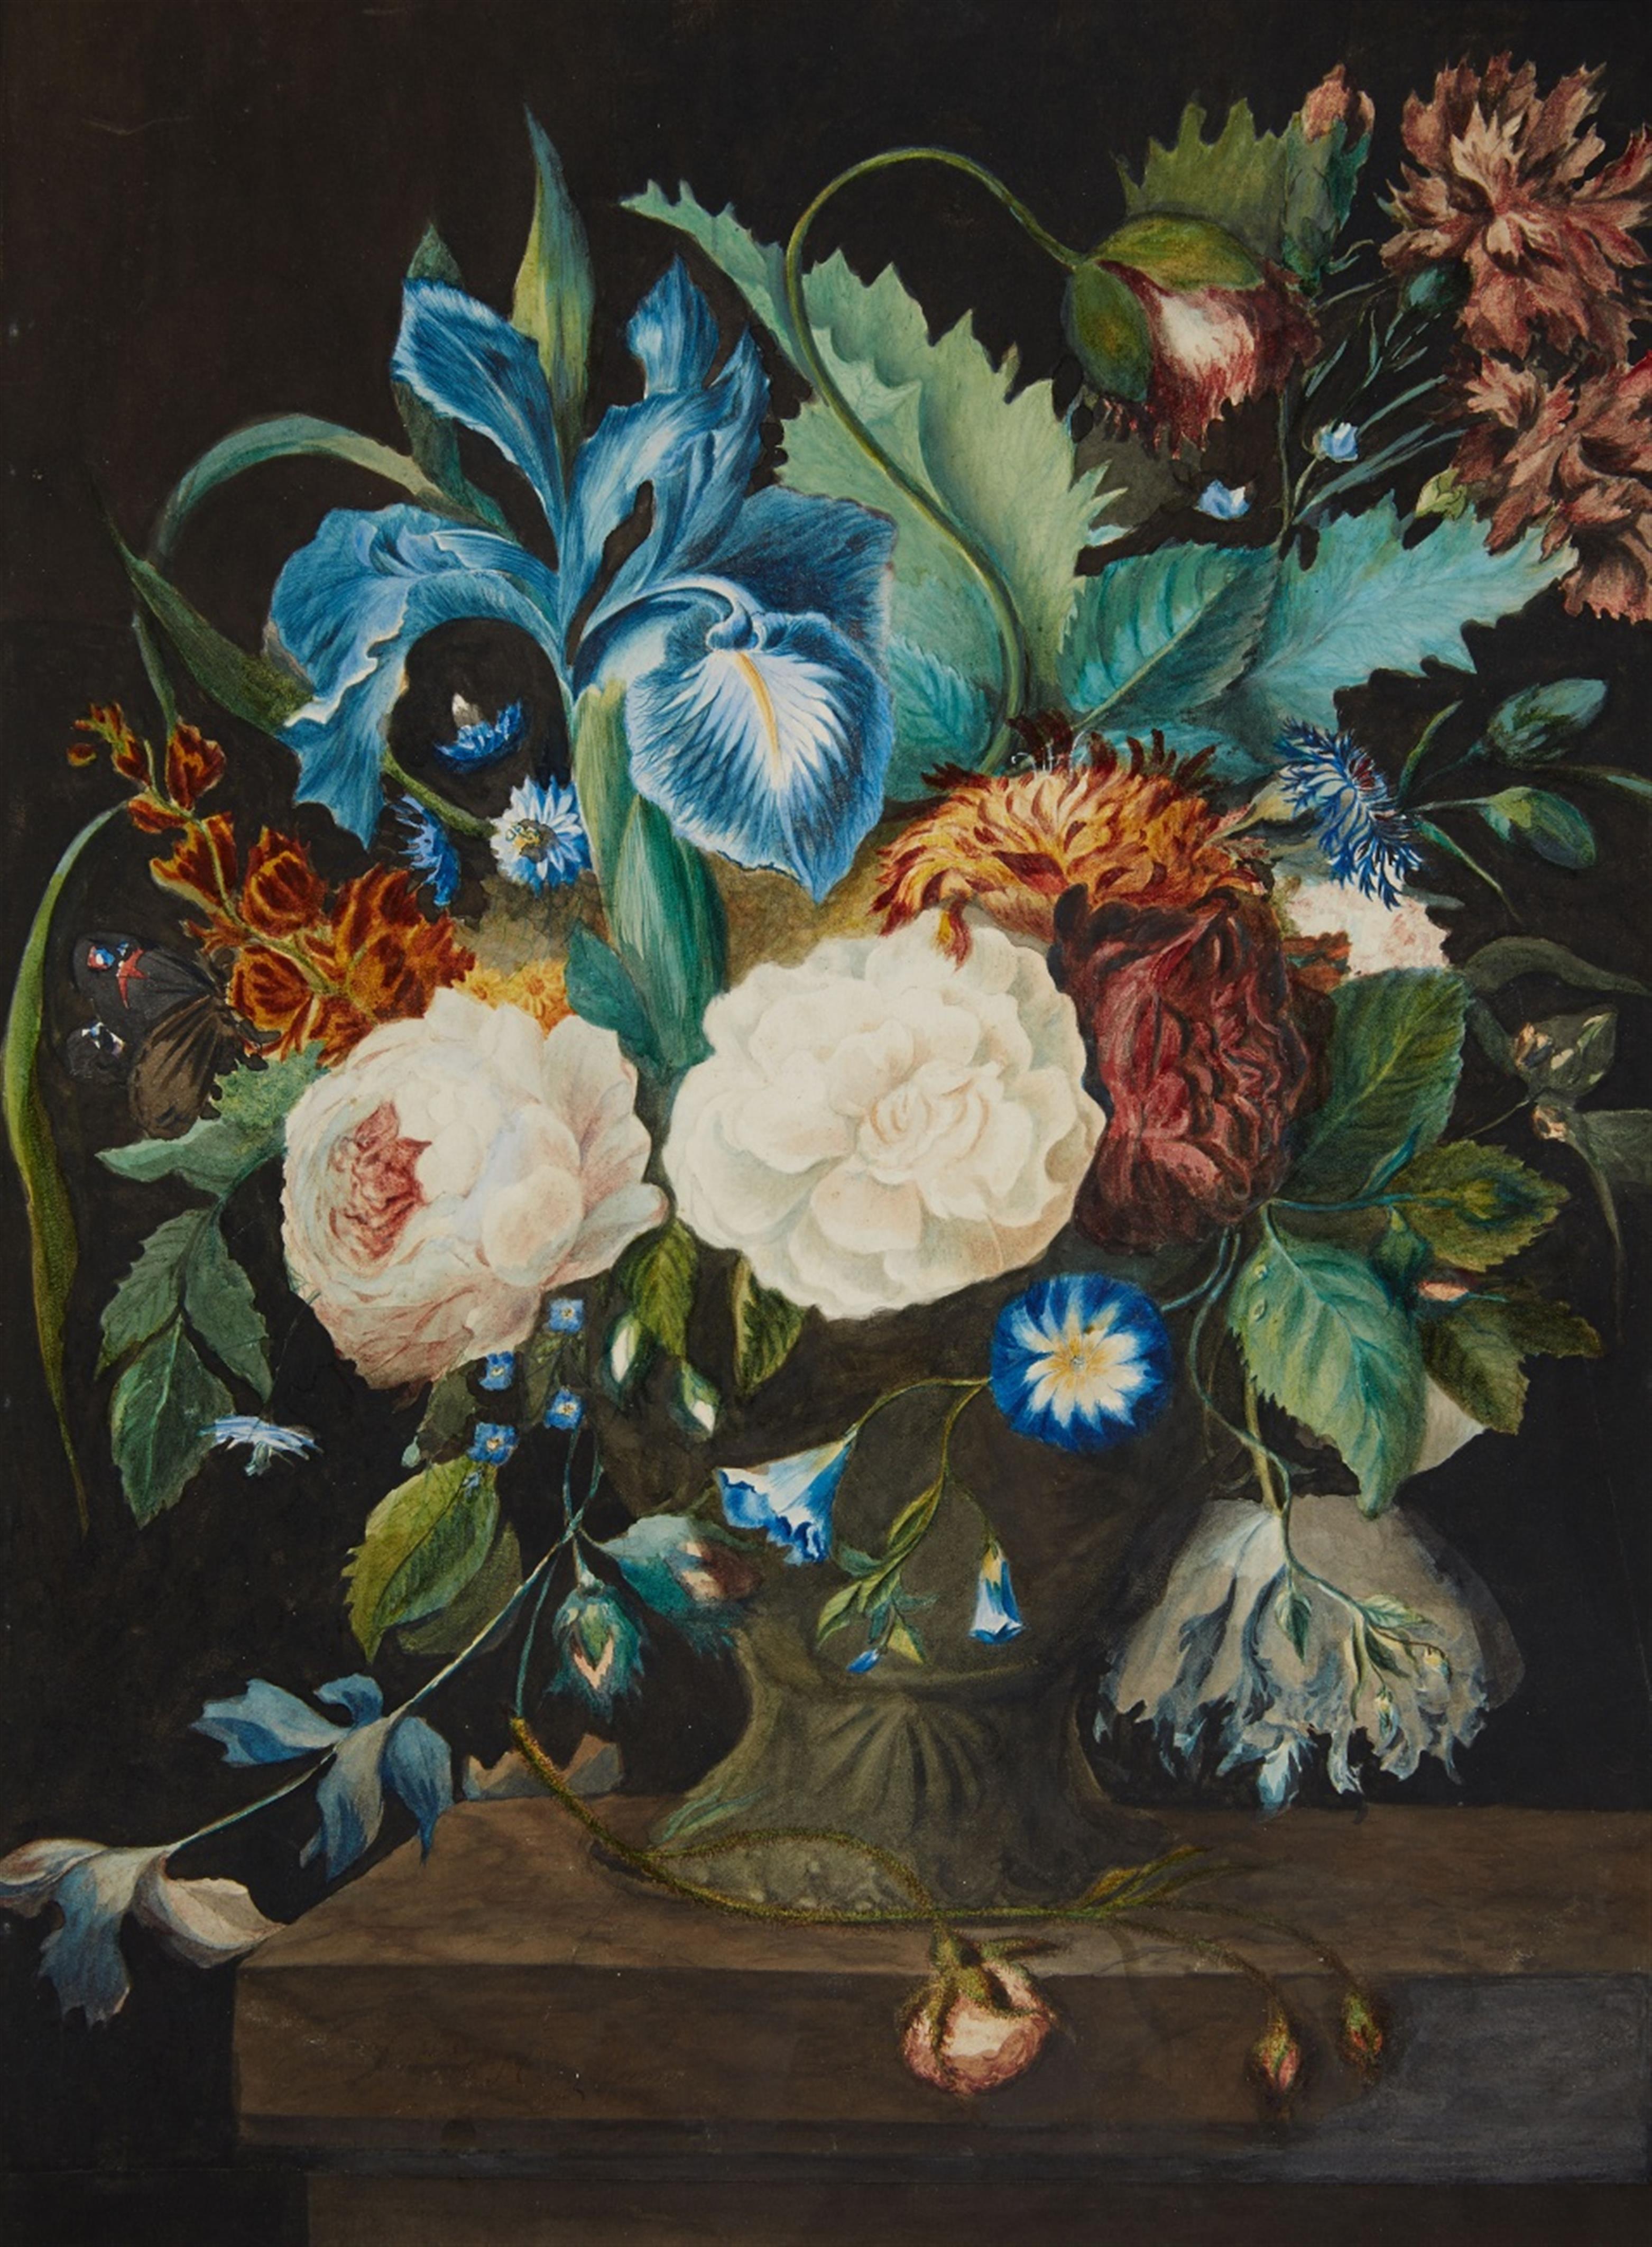 Jan van Huysum, attributed to - Floral Still Life with a Blue Iris, Peonies, Pinks, and Morning Glory - image-1